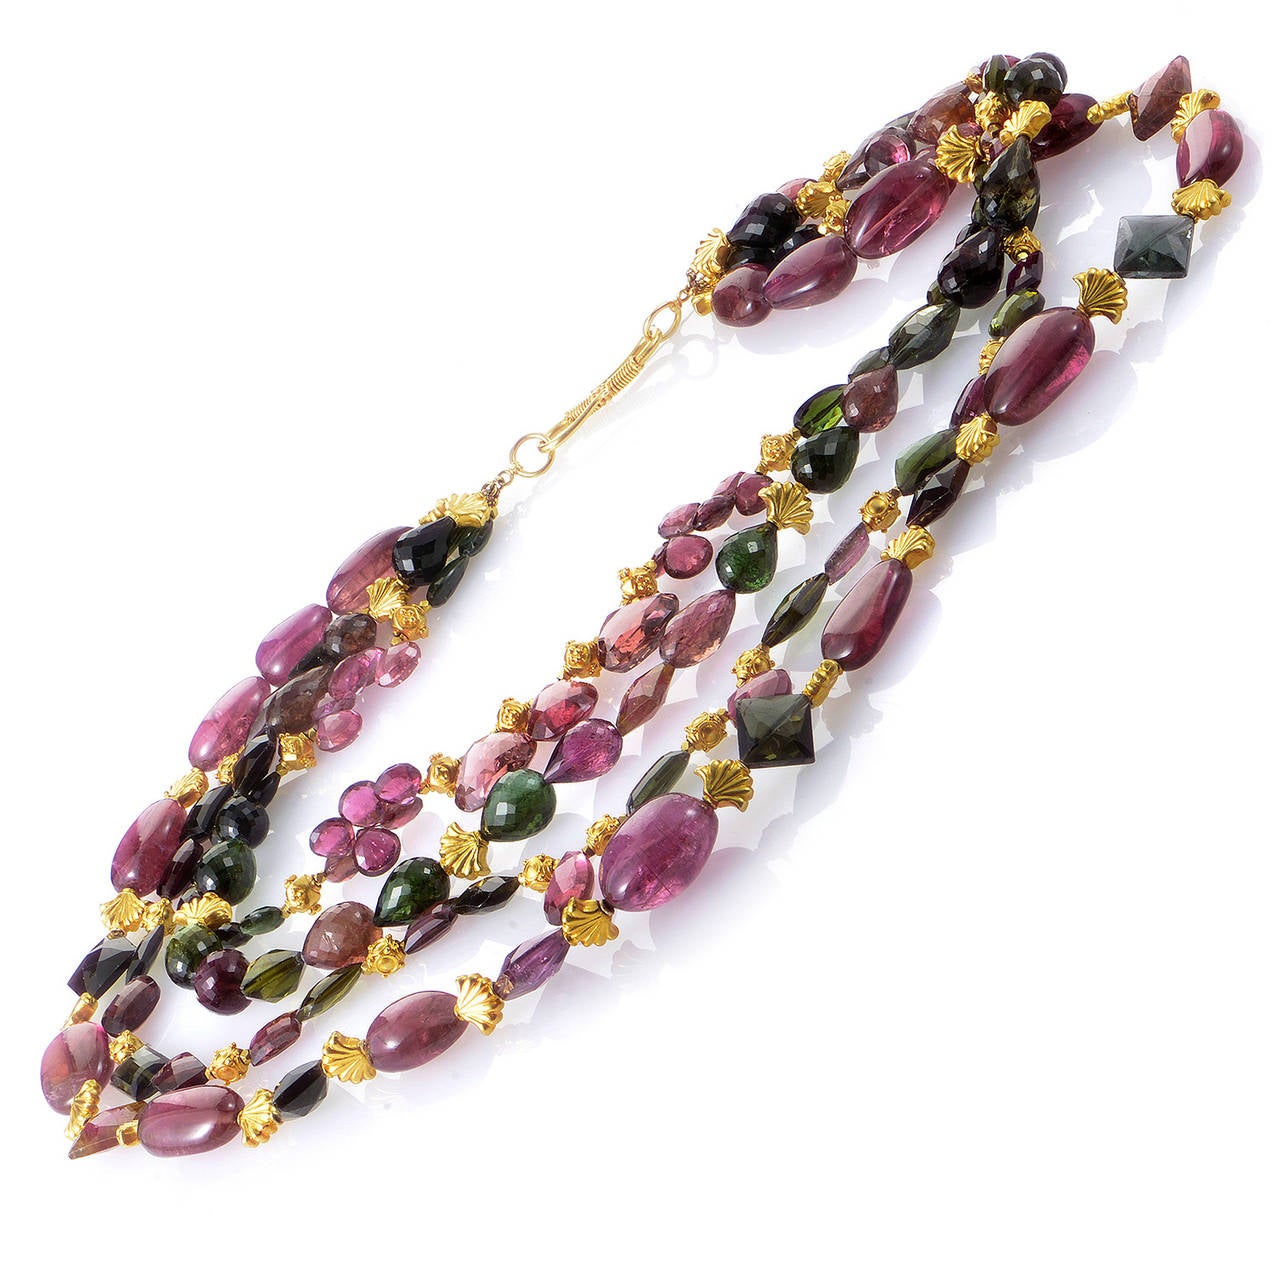 The tantalizingly gorgeous and colorful glow of this necklace is without comparison. The necklace is made of 18K yellow gold and boasts four strands of pink and green tourmaline beads.